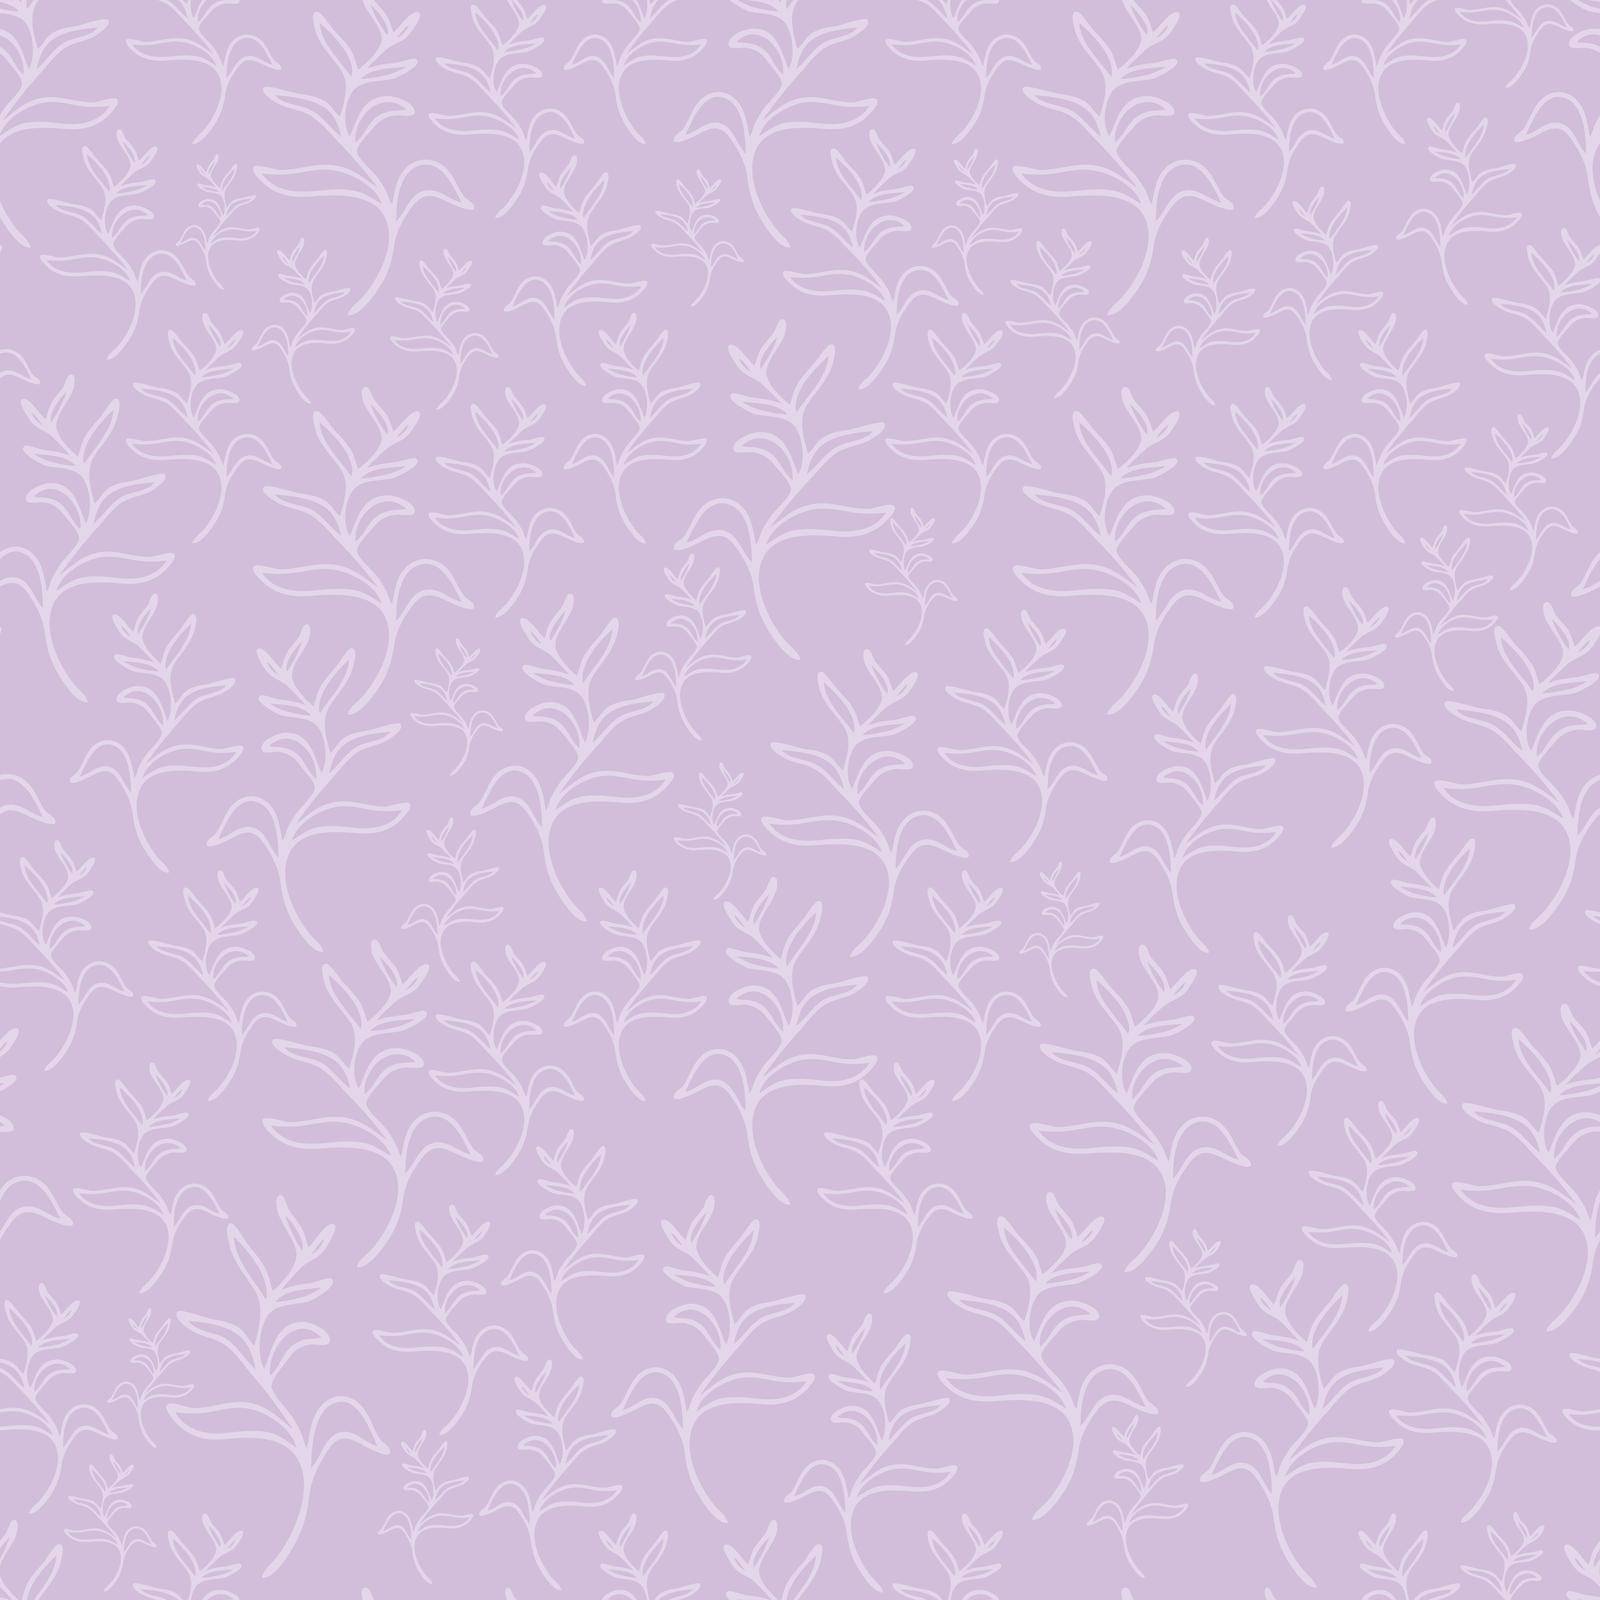 pastel lavender leaves seamless patterns set. botanical floral hand drawn lineart flower elements. packaging wrapping fabric textile design.